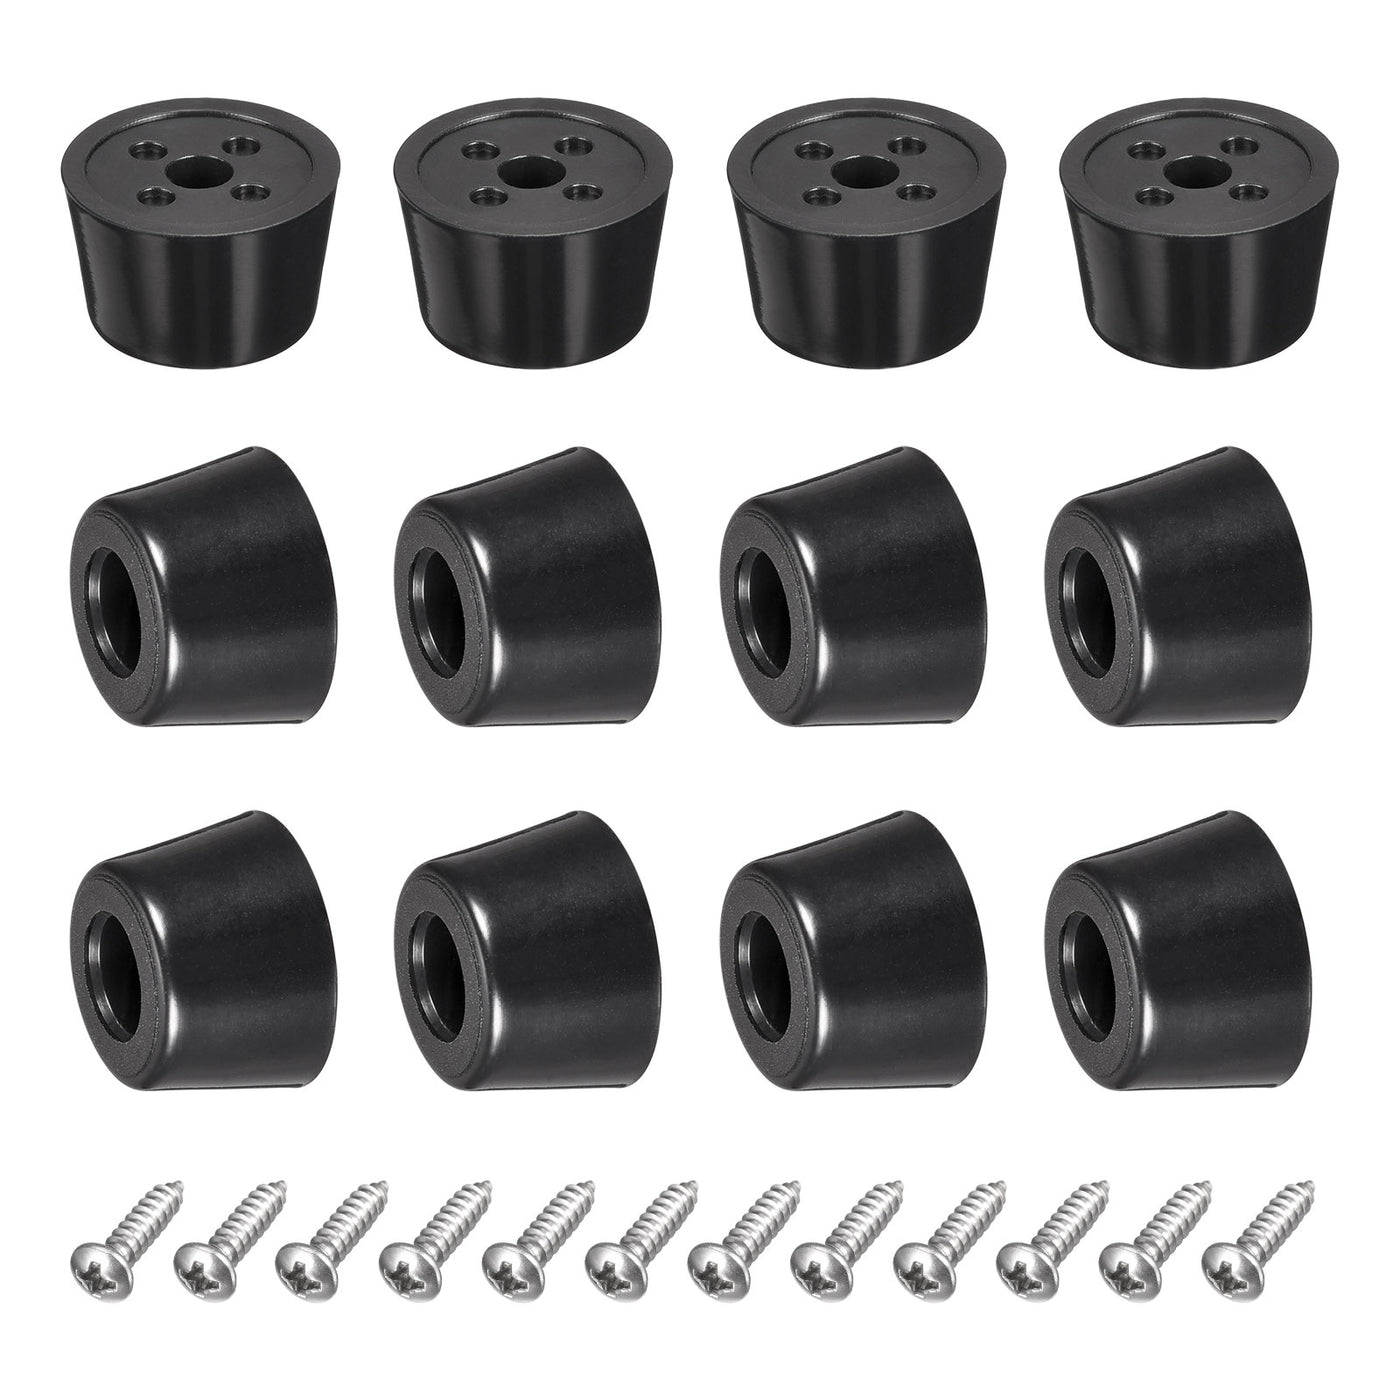 uxcell Uxcell 19mm W x 12mm H Rubber Bumper Feet, Stainless Steel Screws and Washer 12pcs